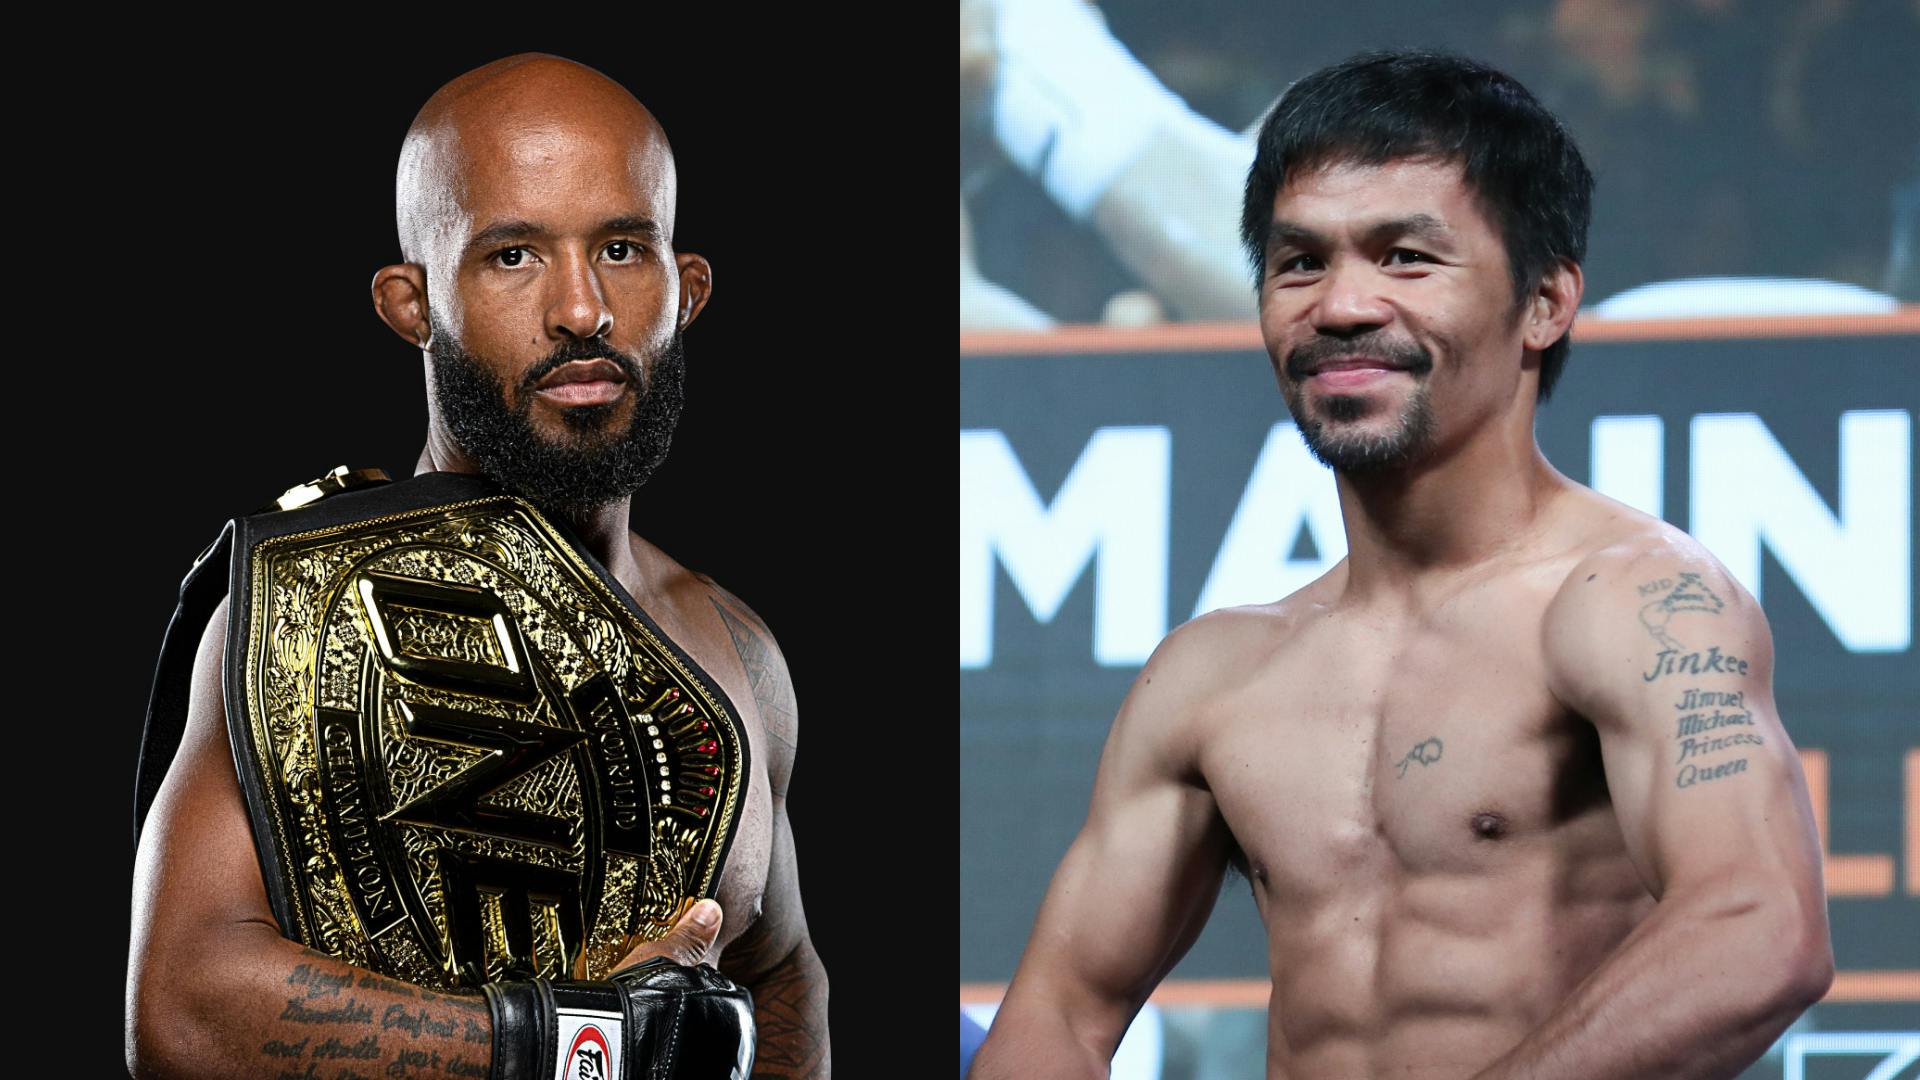 Demetrious Johnson teases boxing match with Manny Pacquiao: “I want to box a legend of the sport”